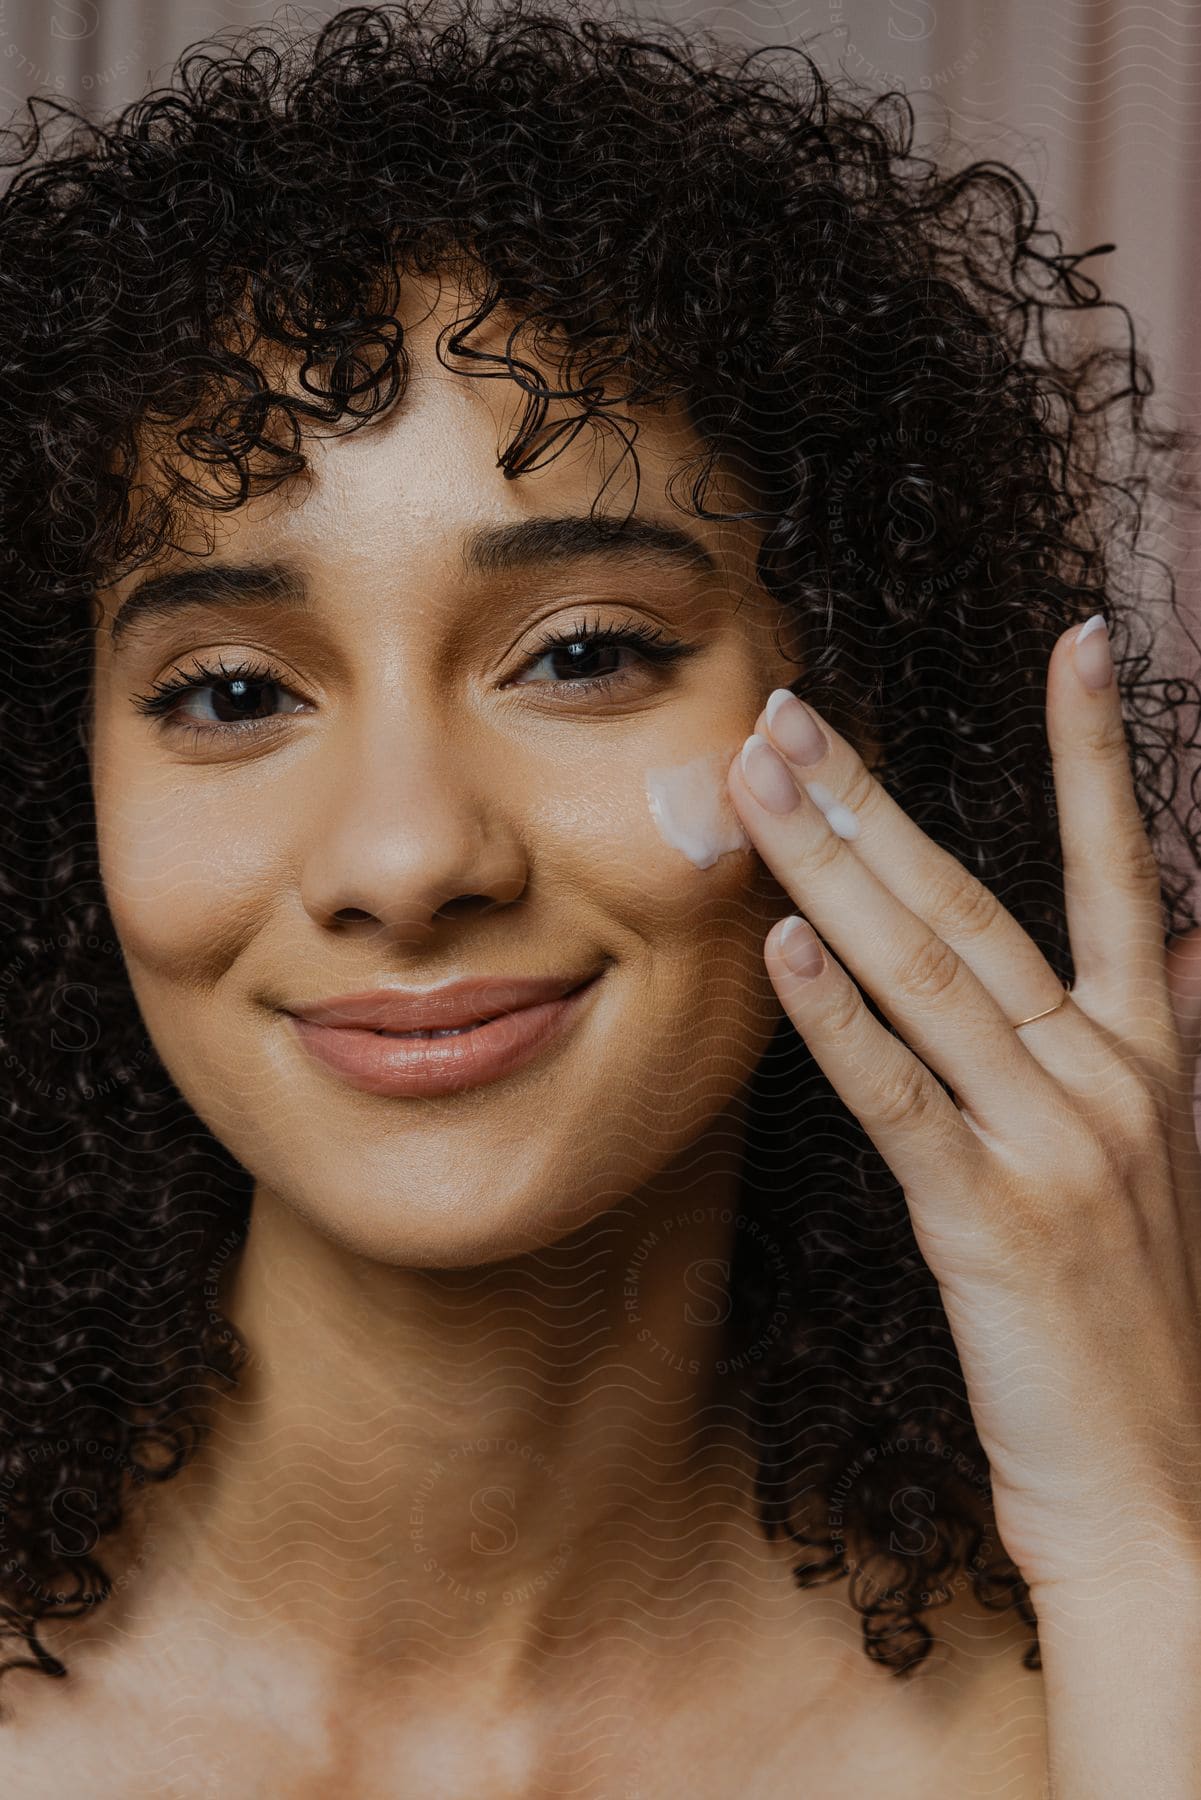 Portrait of a young woman with curly hair applying cream to her face